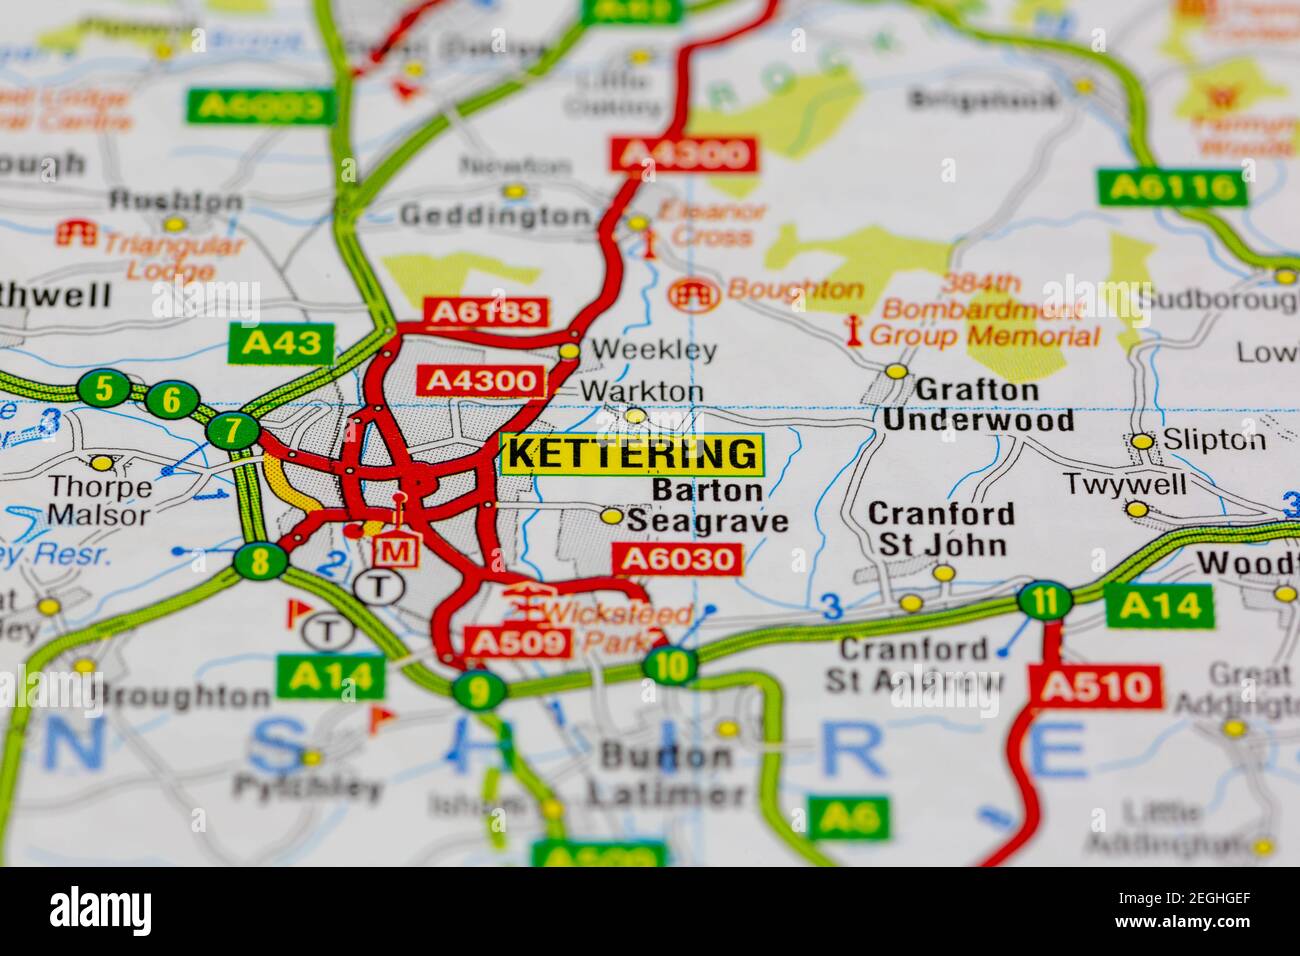 kettering and surrounding areas shown on a road map or geography map Stock Photo